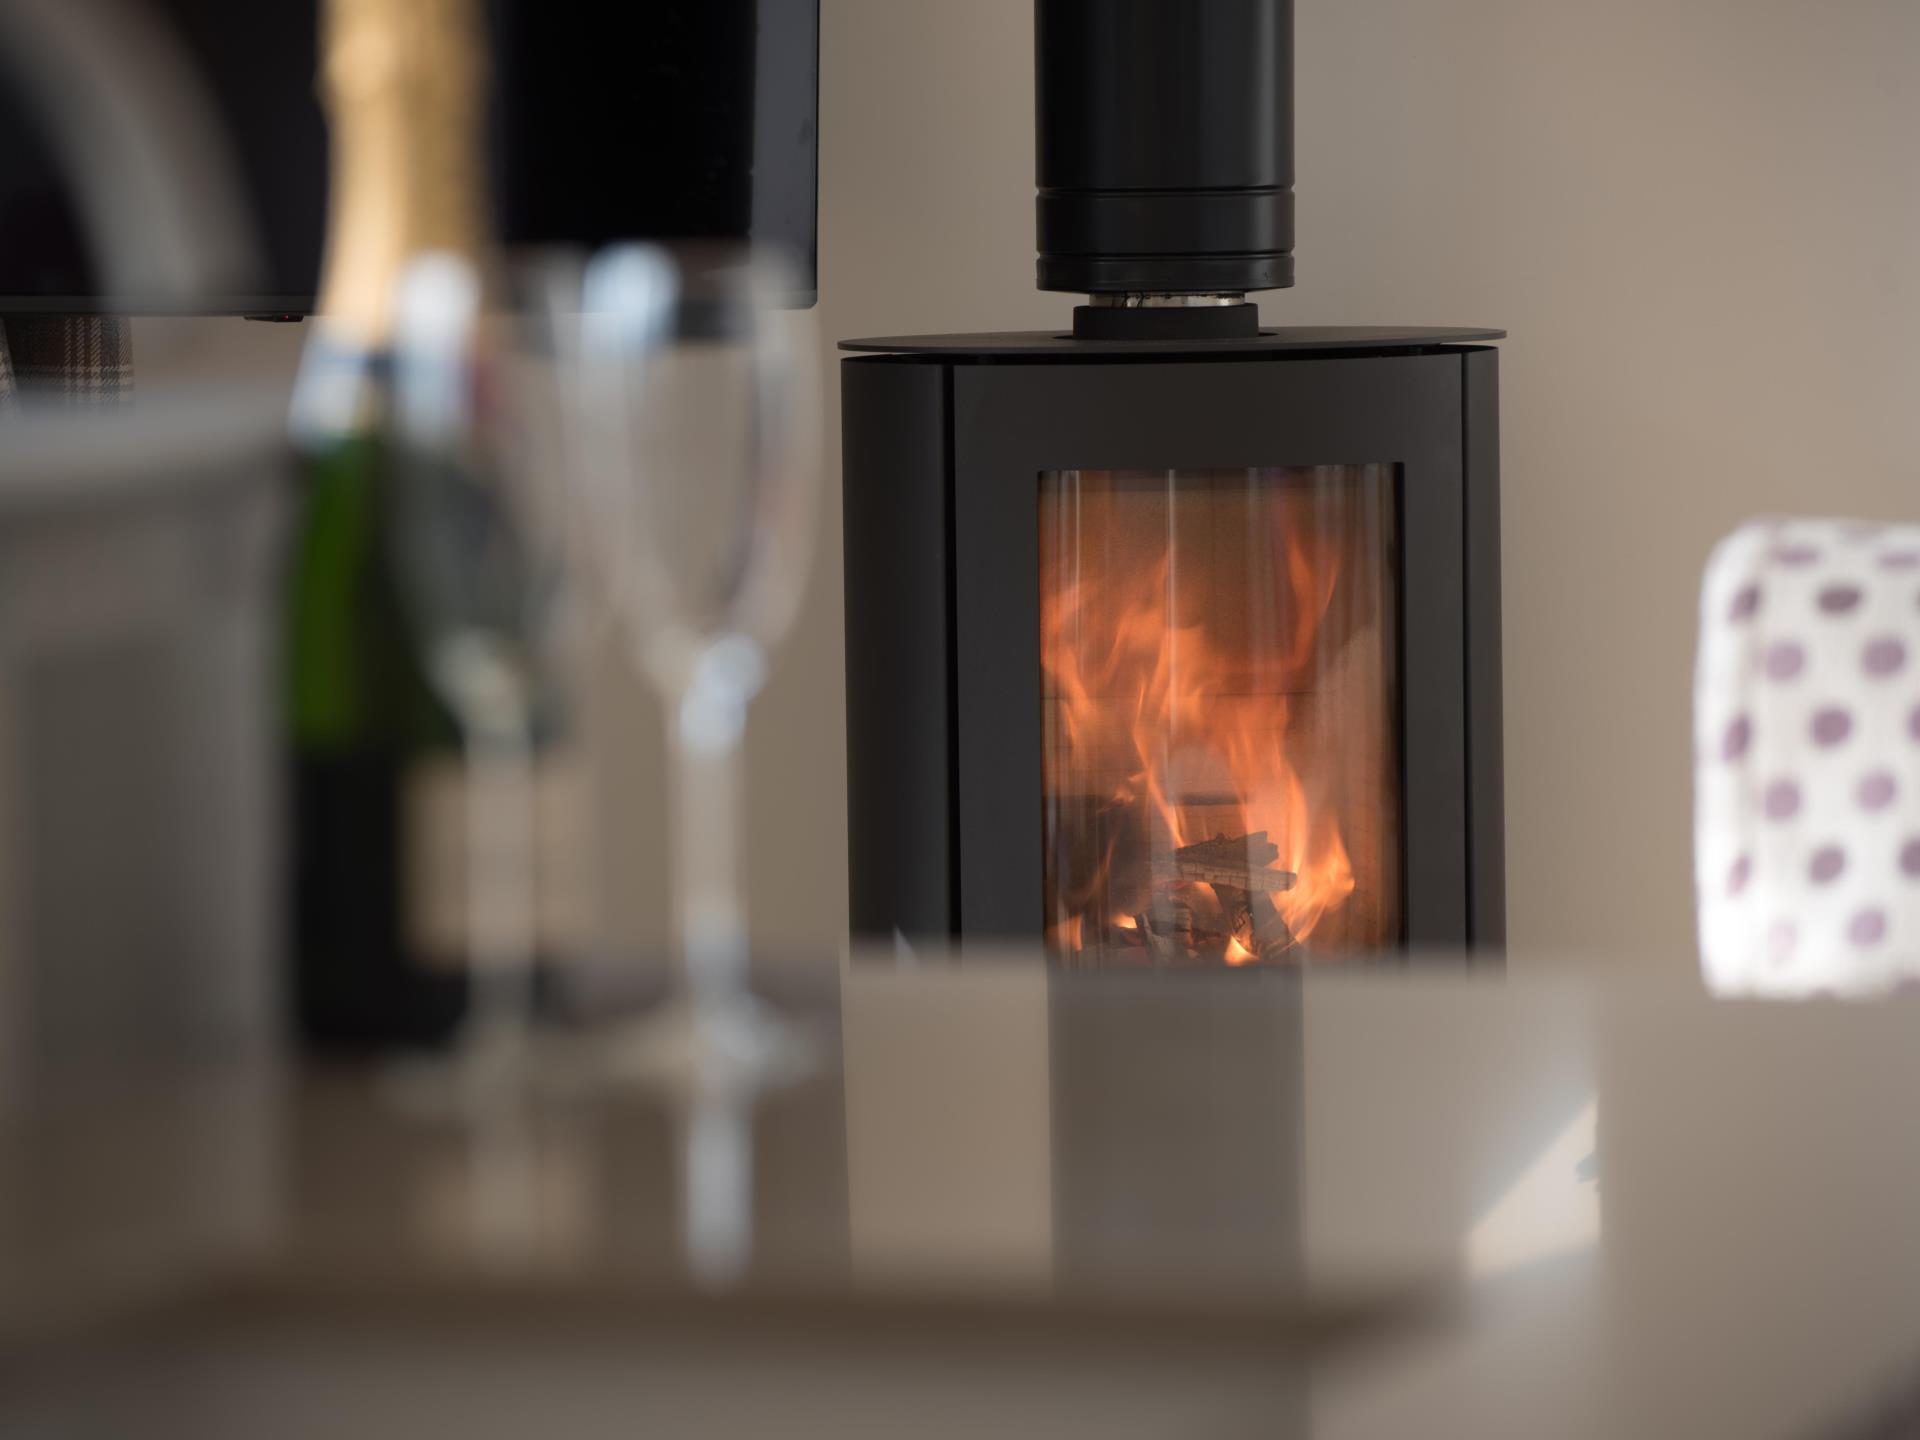 Enjoy your cosy real fire wood-burner